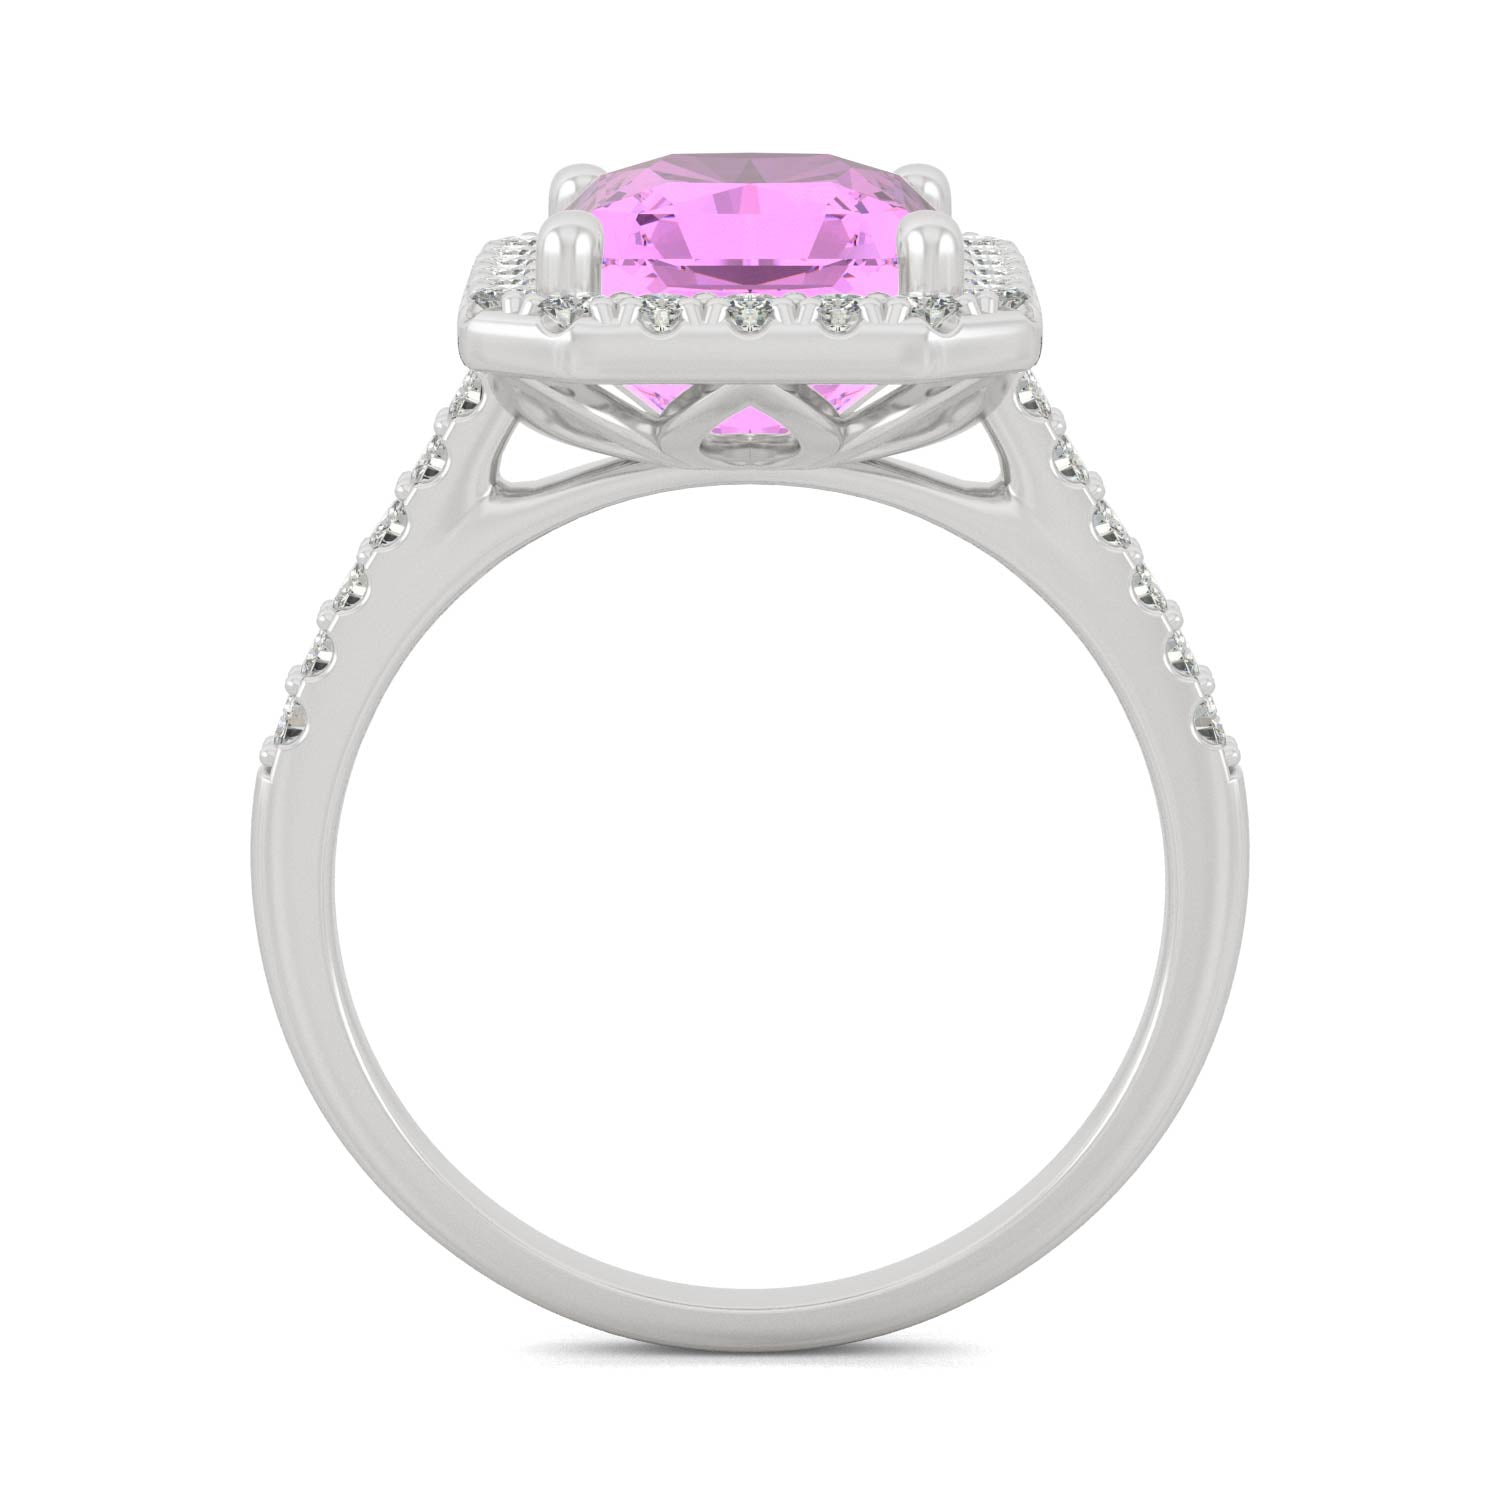 4.51 CTW DEW Radiant Pink Sapphire Halo Ring in 14K White Gold